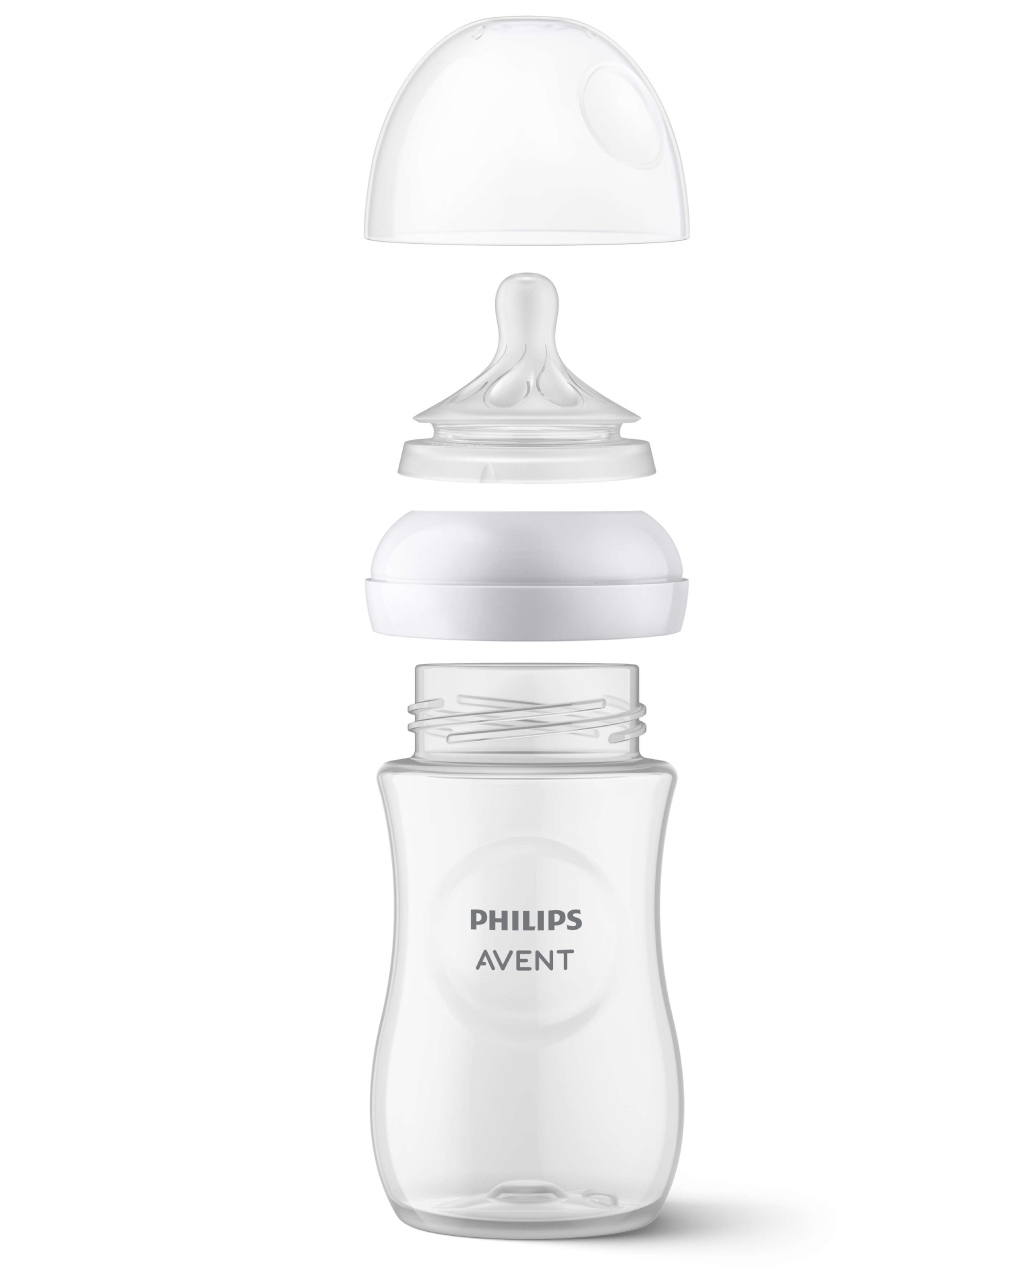 Avent θηλή μαλακής σιλικόνης natural response 1m+ scy963/02 - Philips Avent